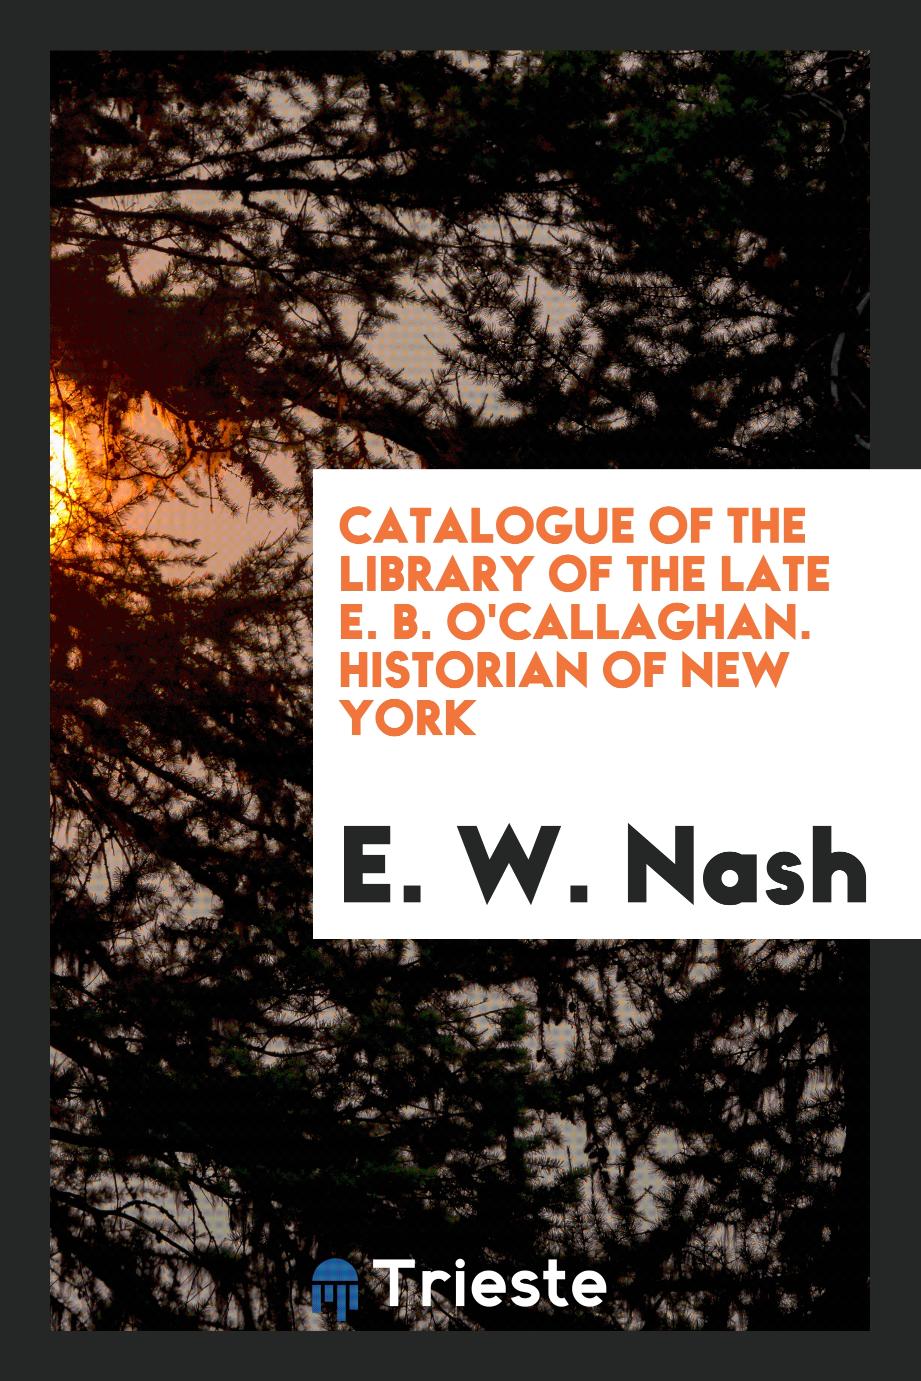 Catalogue of the library of the late E. B. O'Callaghan. Historian of New York